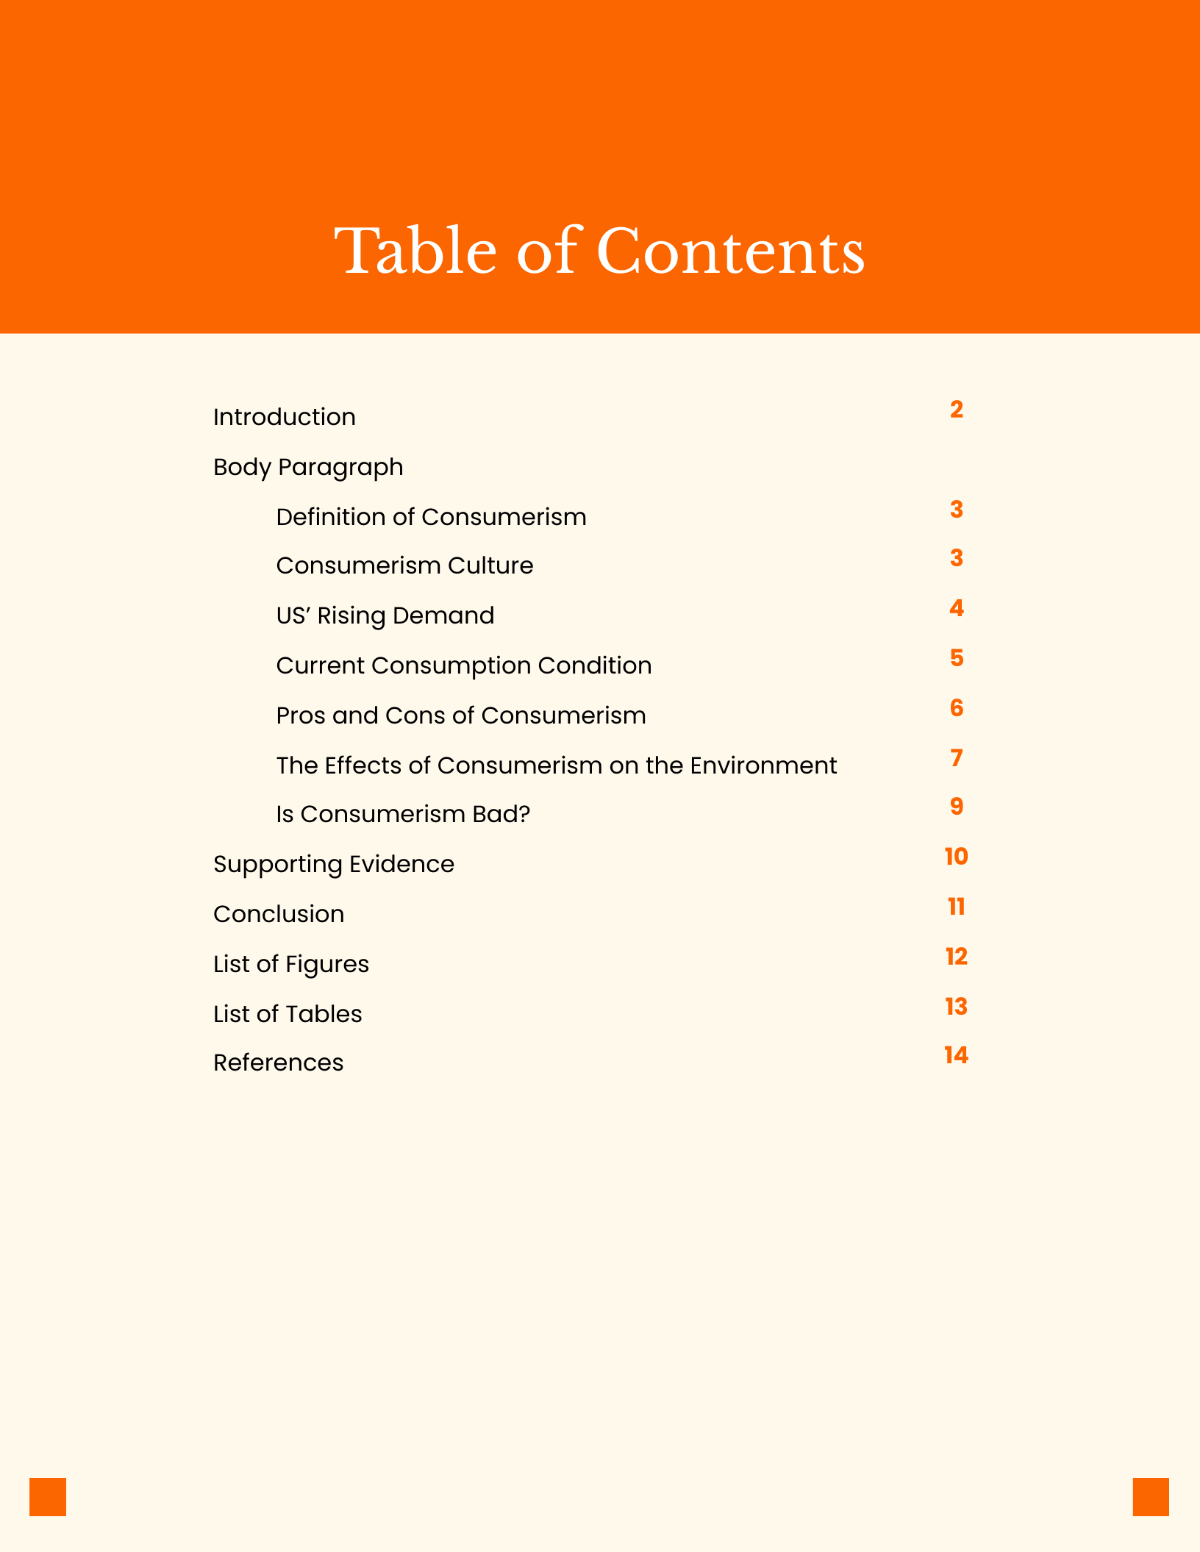 Essay Table of Contents Template